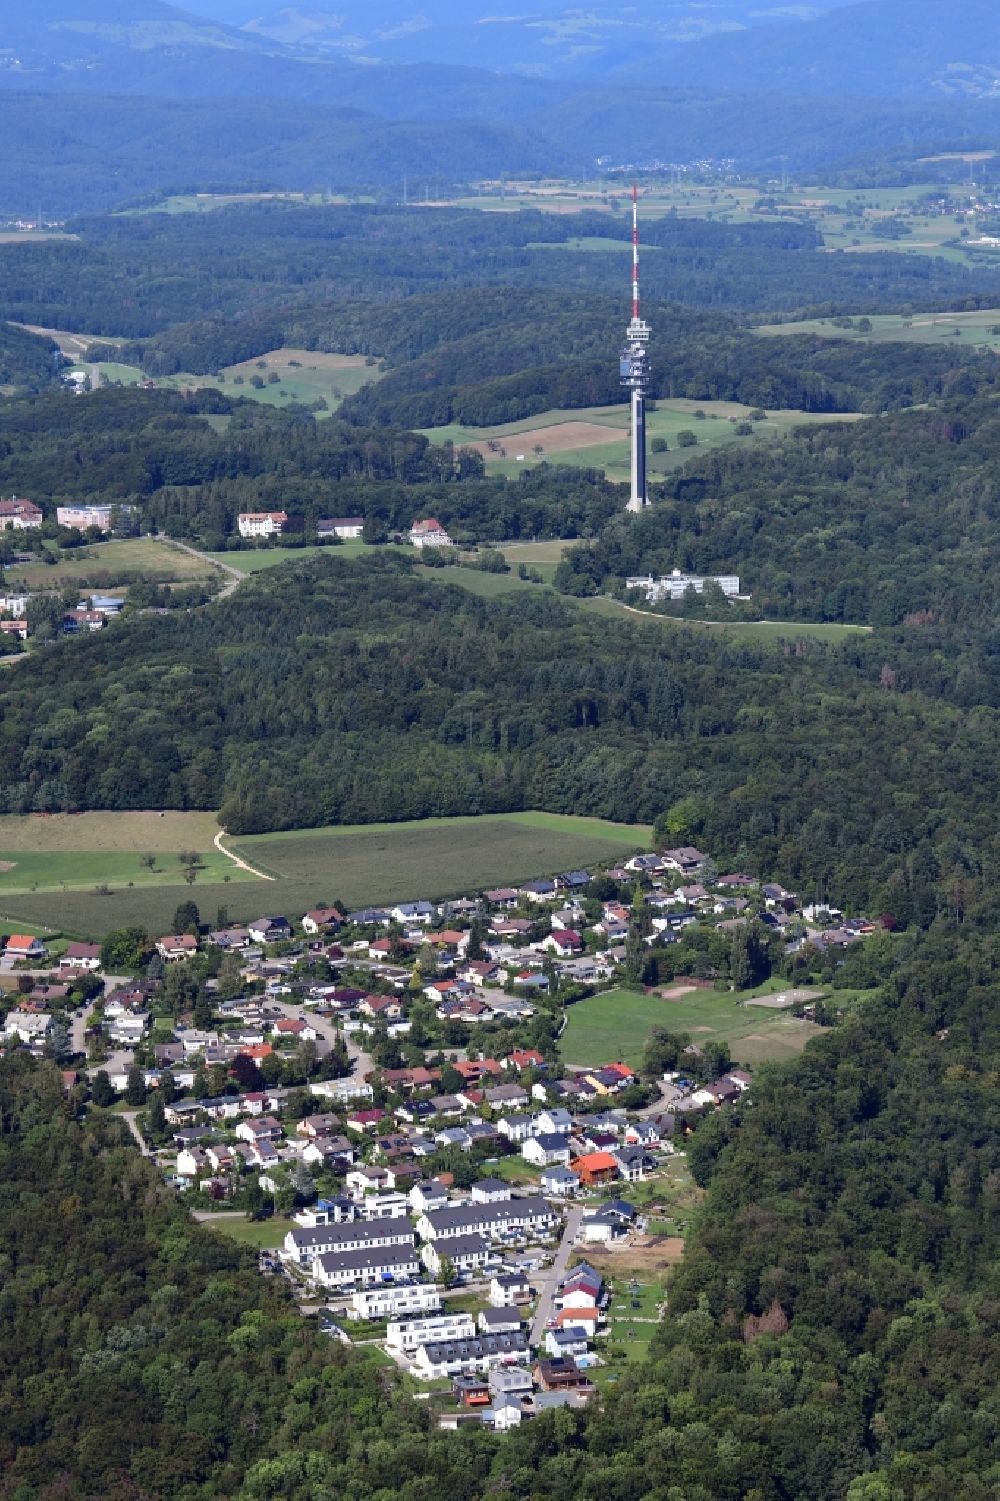 Aerial image Grenzach-Wyhlen - Residential area and district Neufeld in in Grenzach-Wyhlen in the state Baden-Wurttemberg, Germany. Looking to the landmark and television tower St. Chrischona in Switzerland